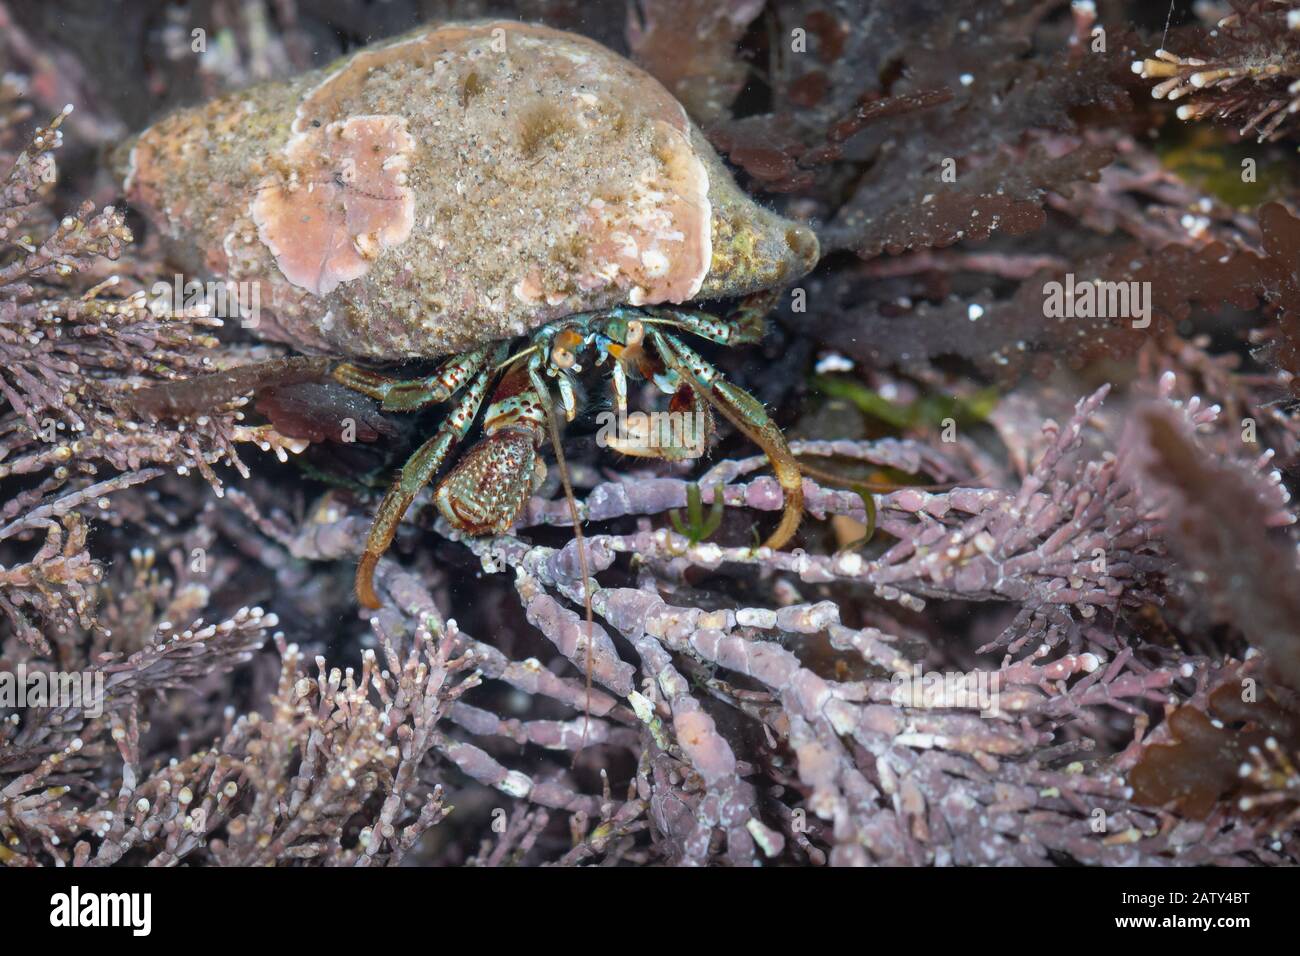 The hermit crab (Pagurus bernhardus) moves through the seaweed in the rock pool in the Yorkshire Coast Stock Photo